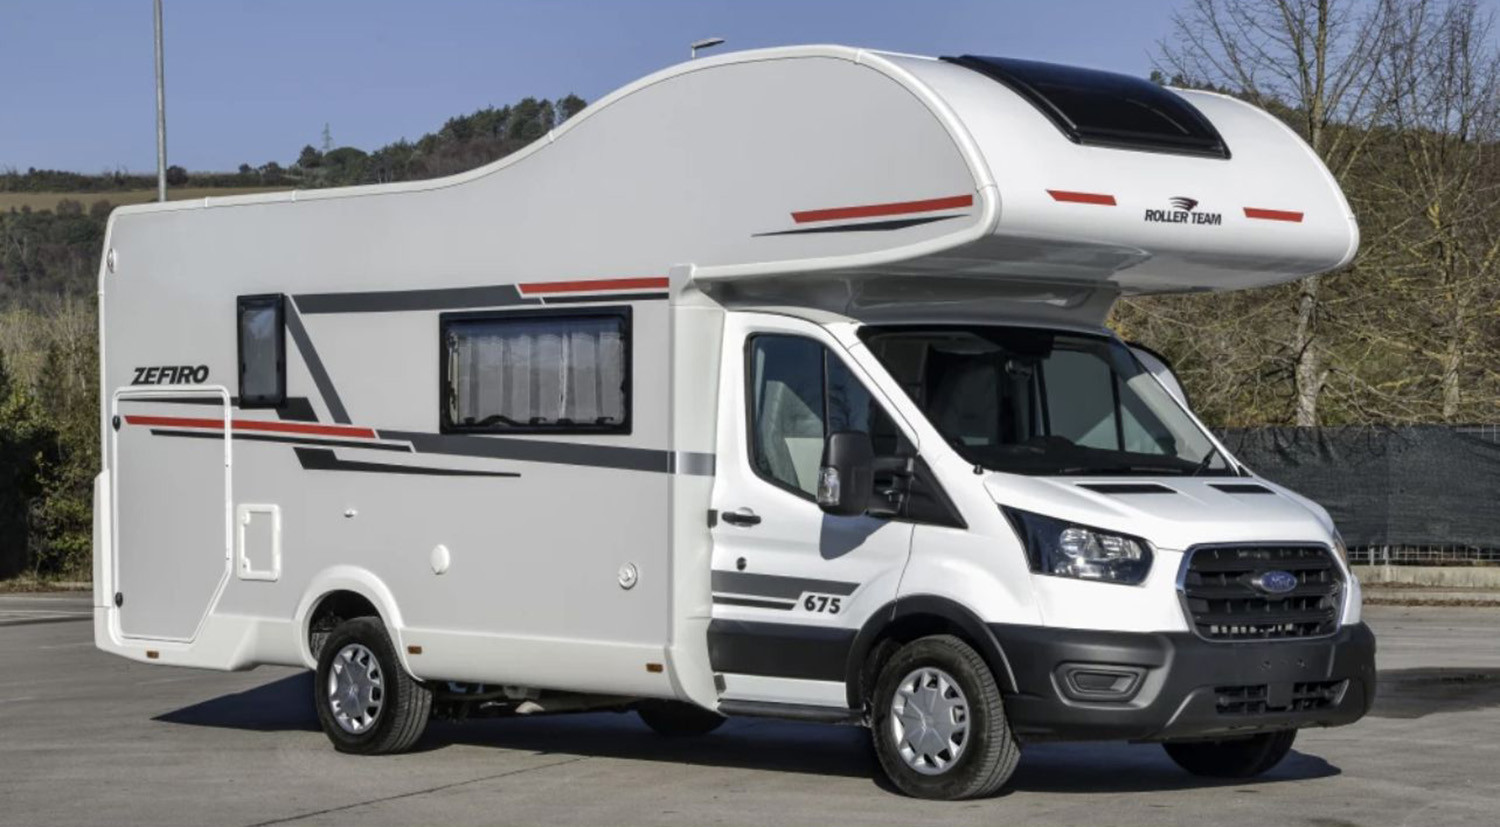 A  Motorhome called Christine-Alice and  for hire in Clacton, Essex